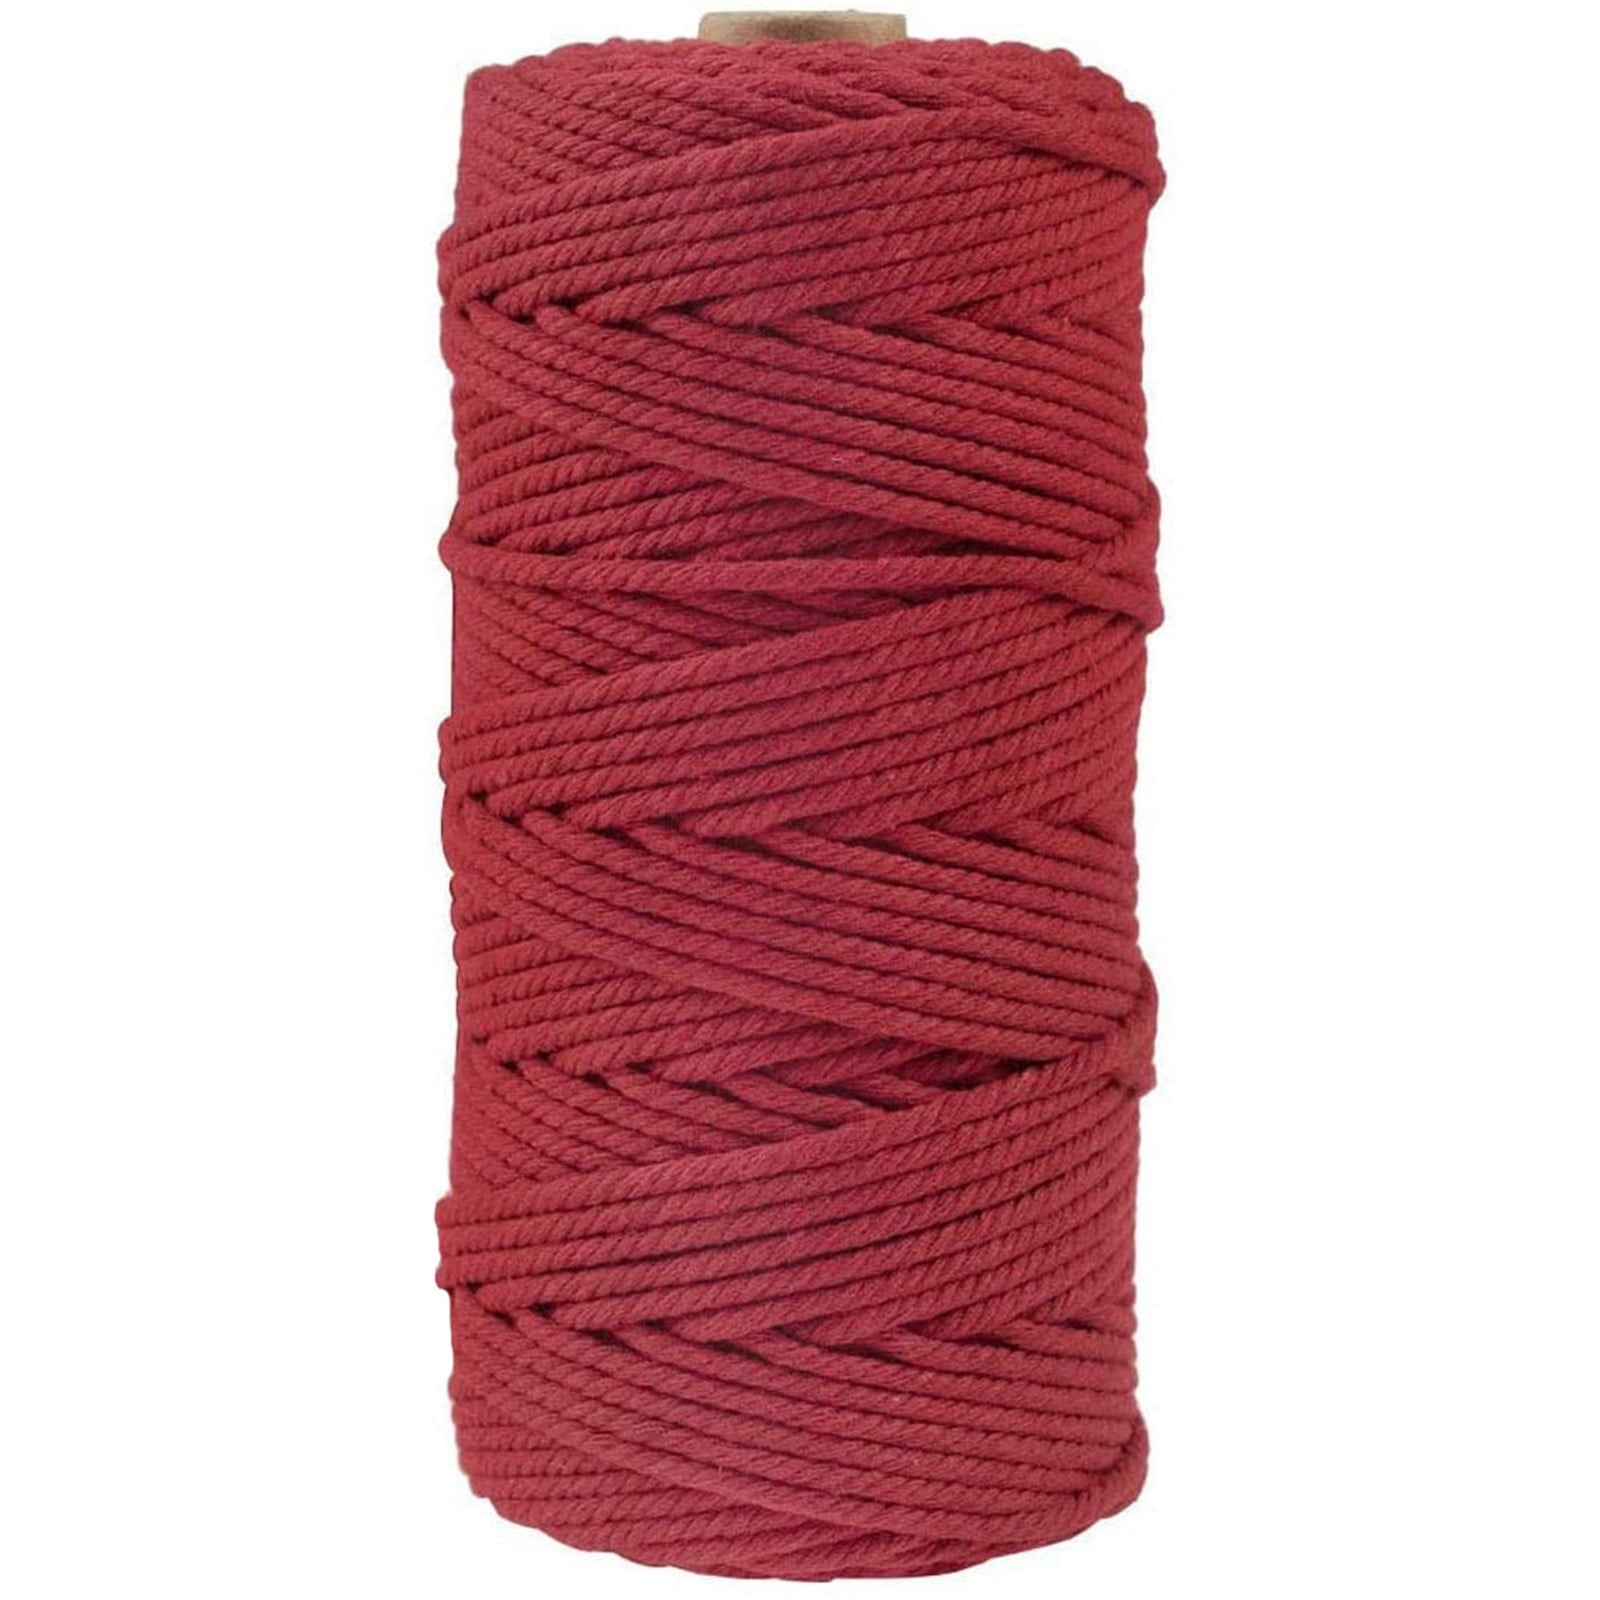 Xkdous Beige Macrame Cord 3mm x 109yards, Colored Macrame Rope, 3 Strand Twisted Cotton Rope Macrame Yarn, Colorful Cotton Craft Cord for Wall Hanging